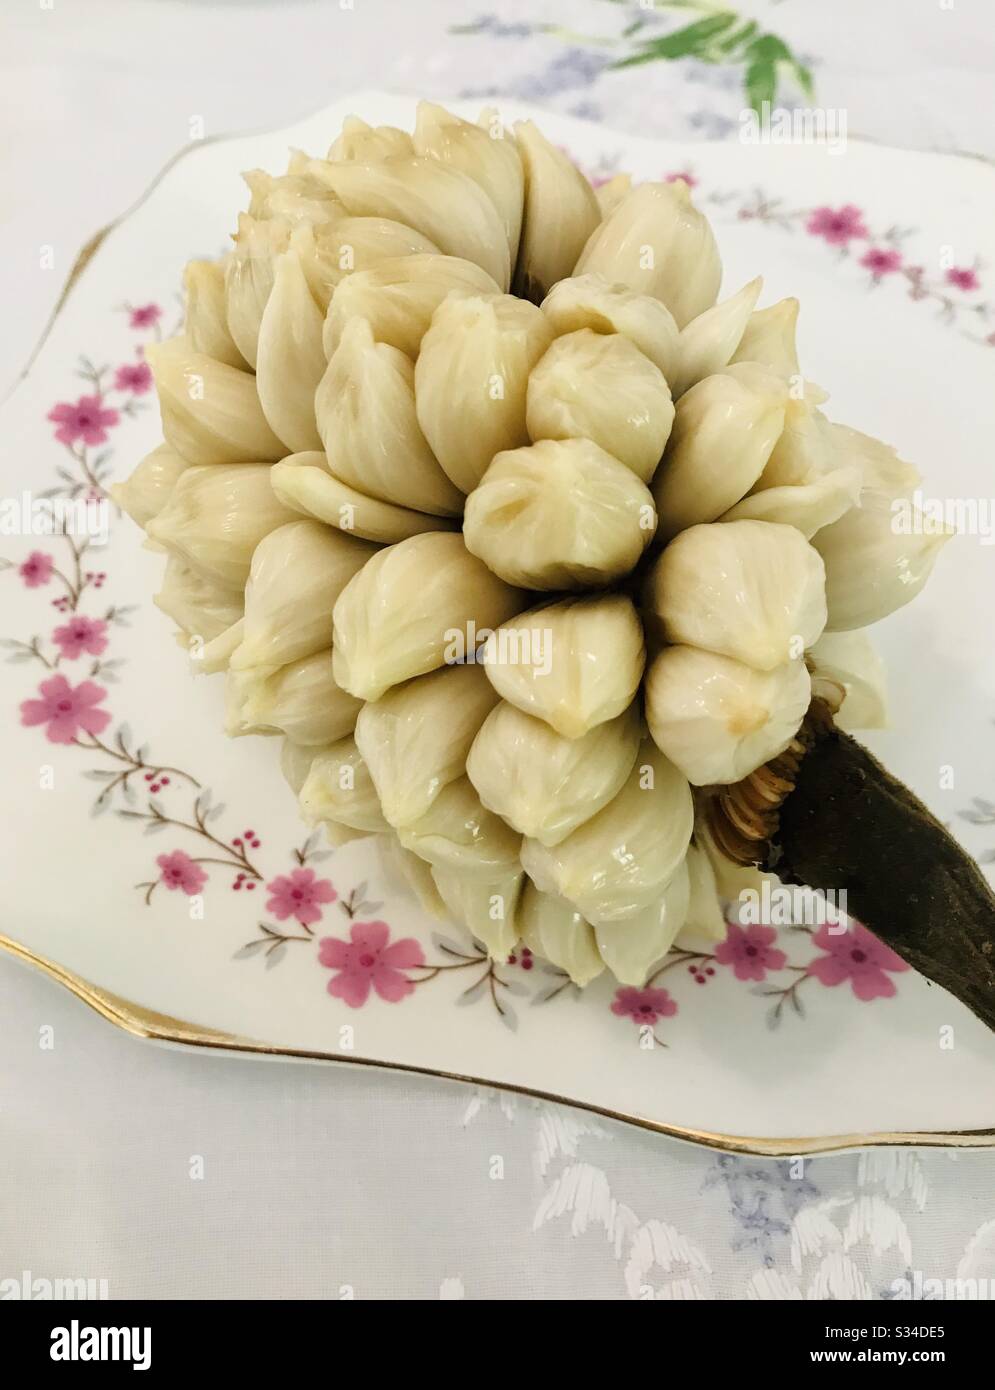 A bouquet of marang fruit served on an English fine bone China.  Such a skill to peel the entire fruit and serve it whole! Exotic tropical fruit in full elegance. Stock Photo